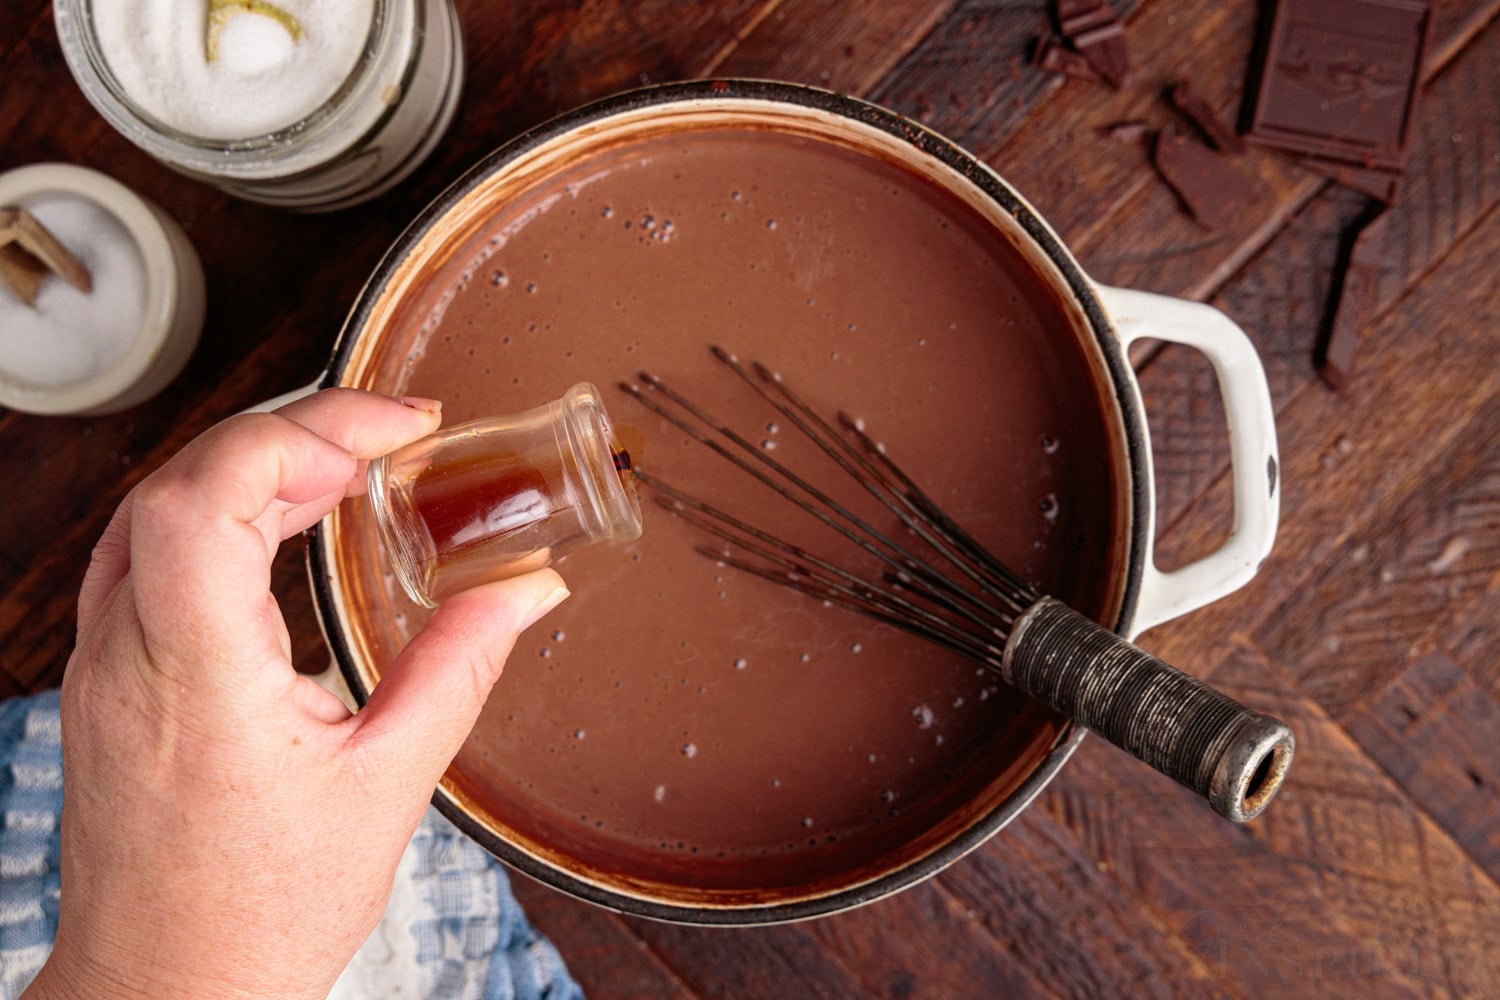 vanilla extract being added into the chocolate mixture in a sauce pan